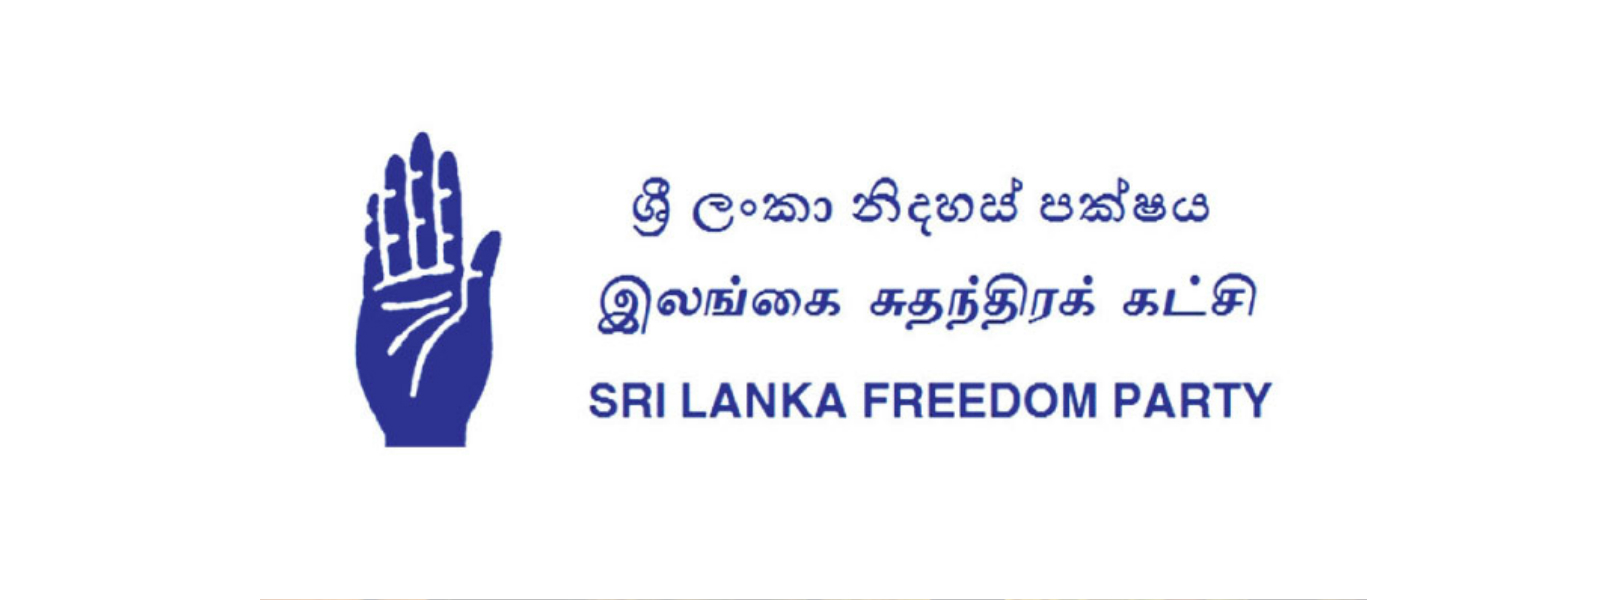 Special Central committee meeting of SLFP today 